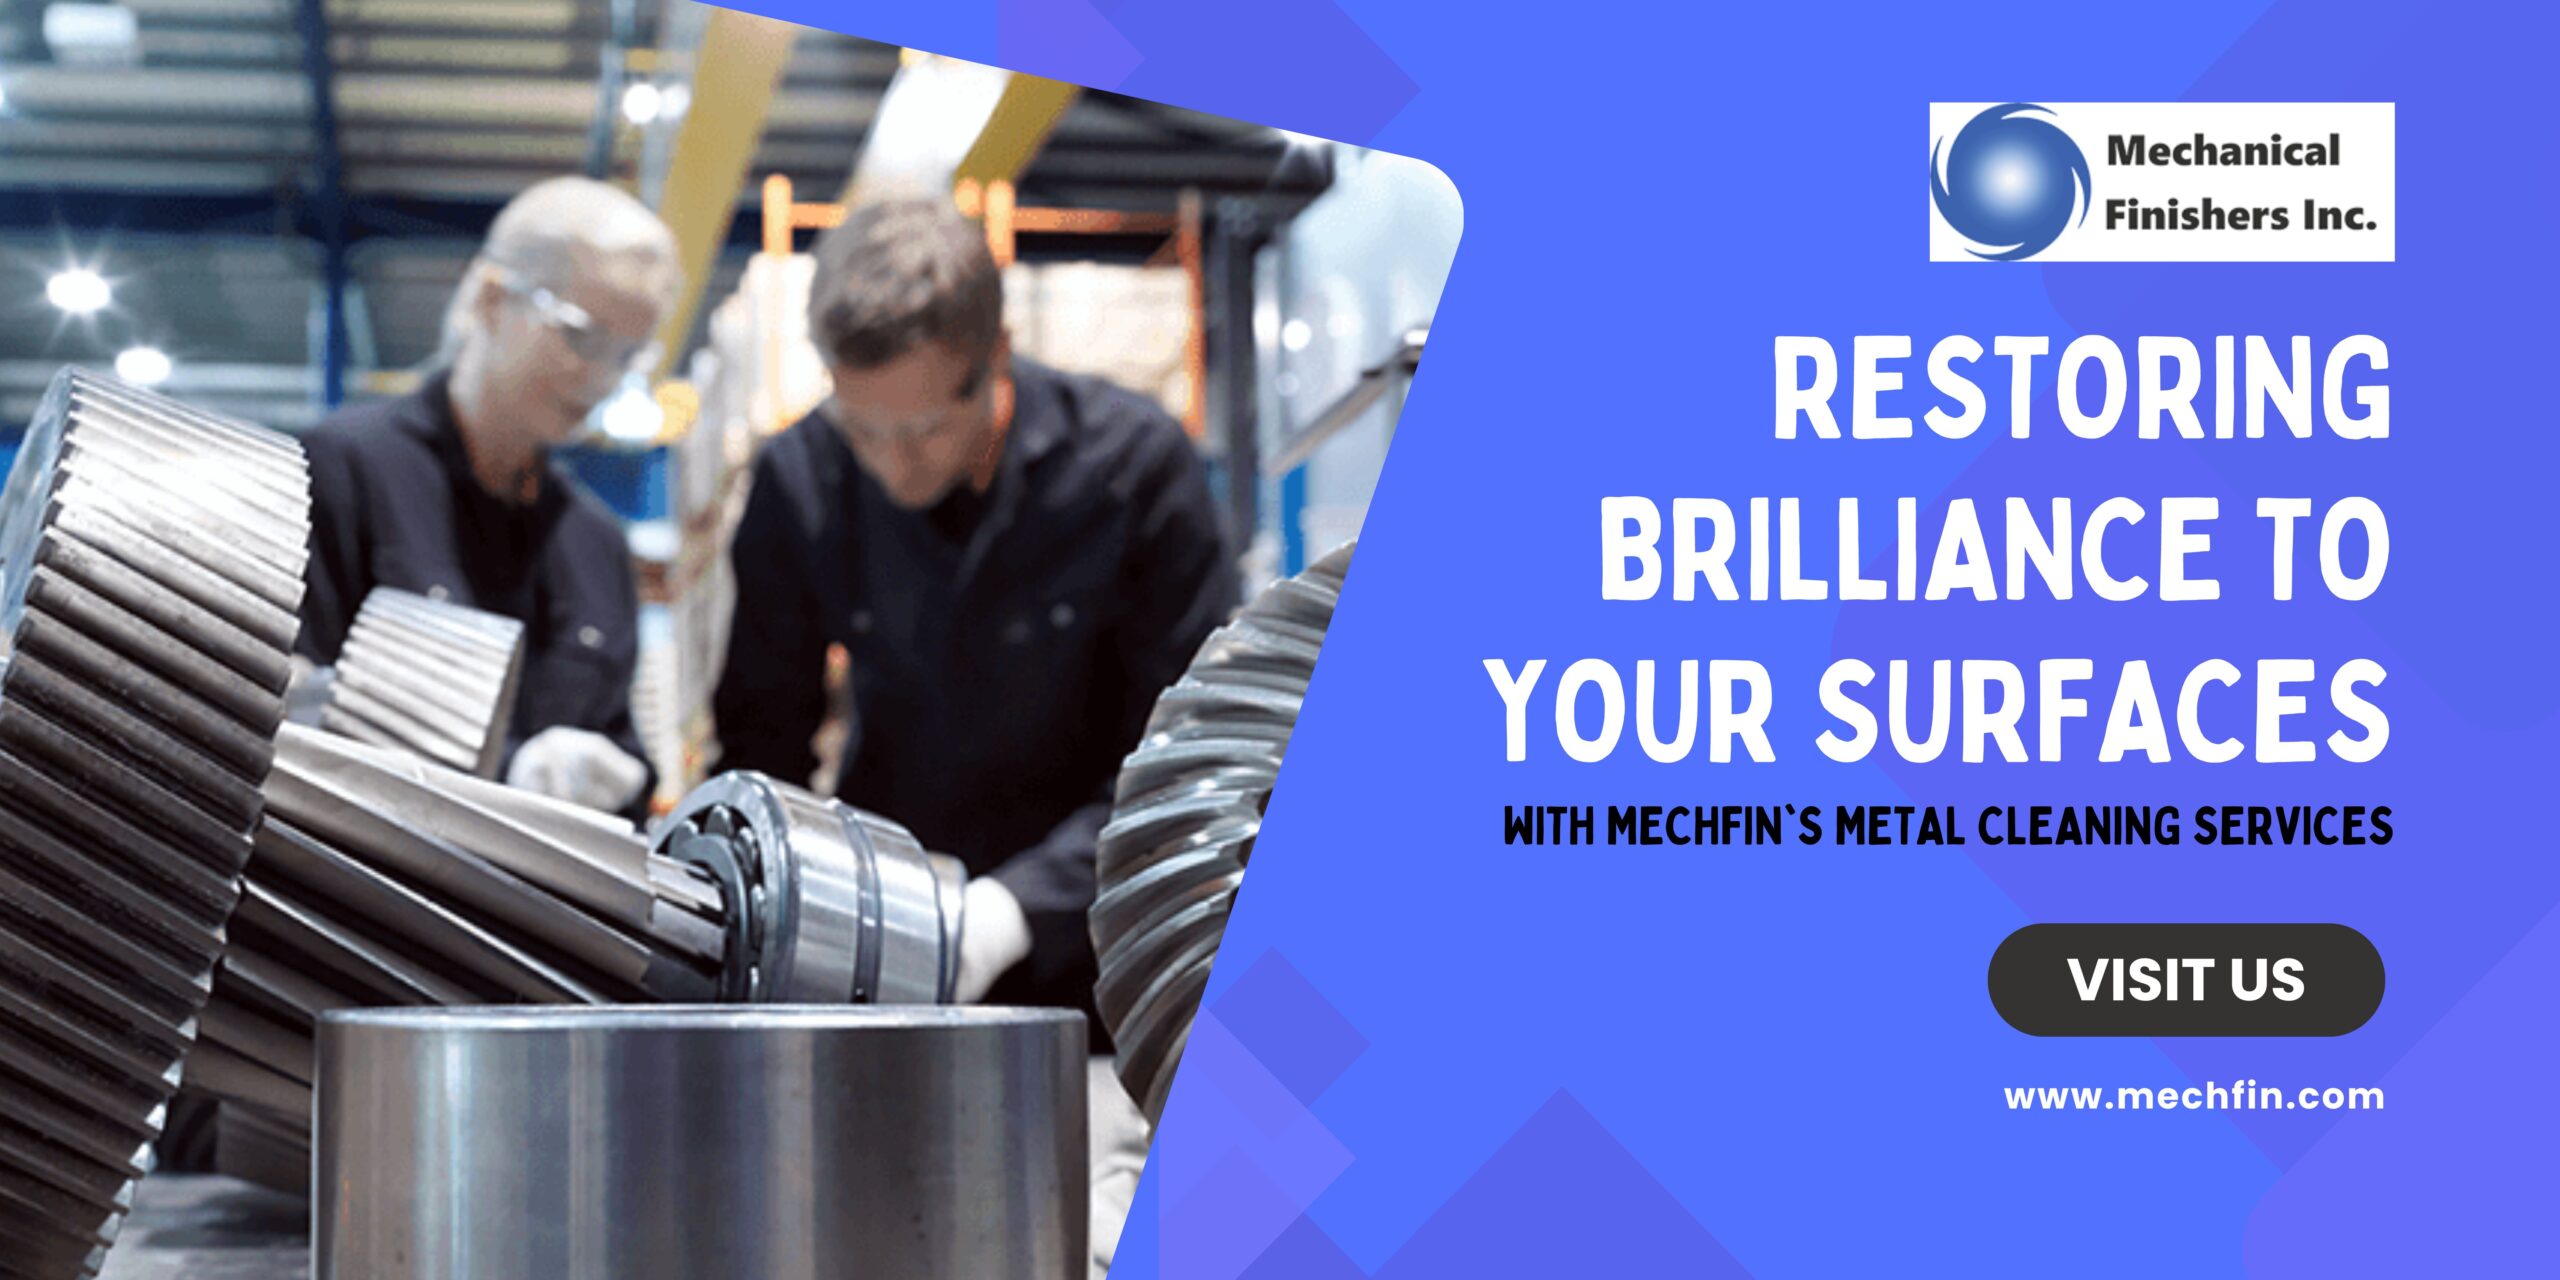 MechFin's Metal Cleaning Services